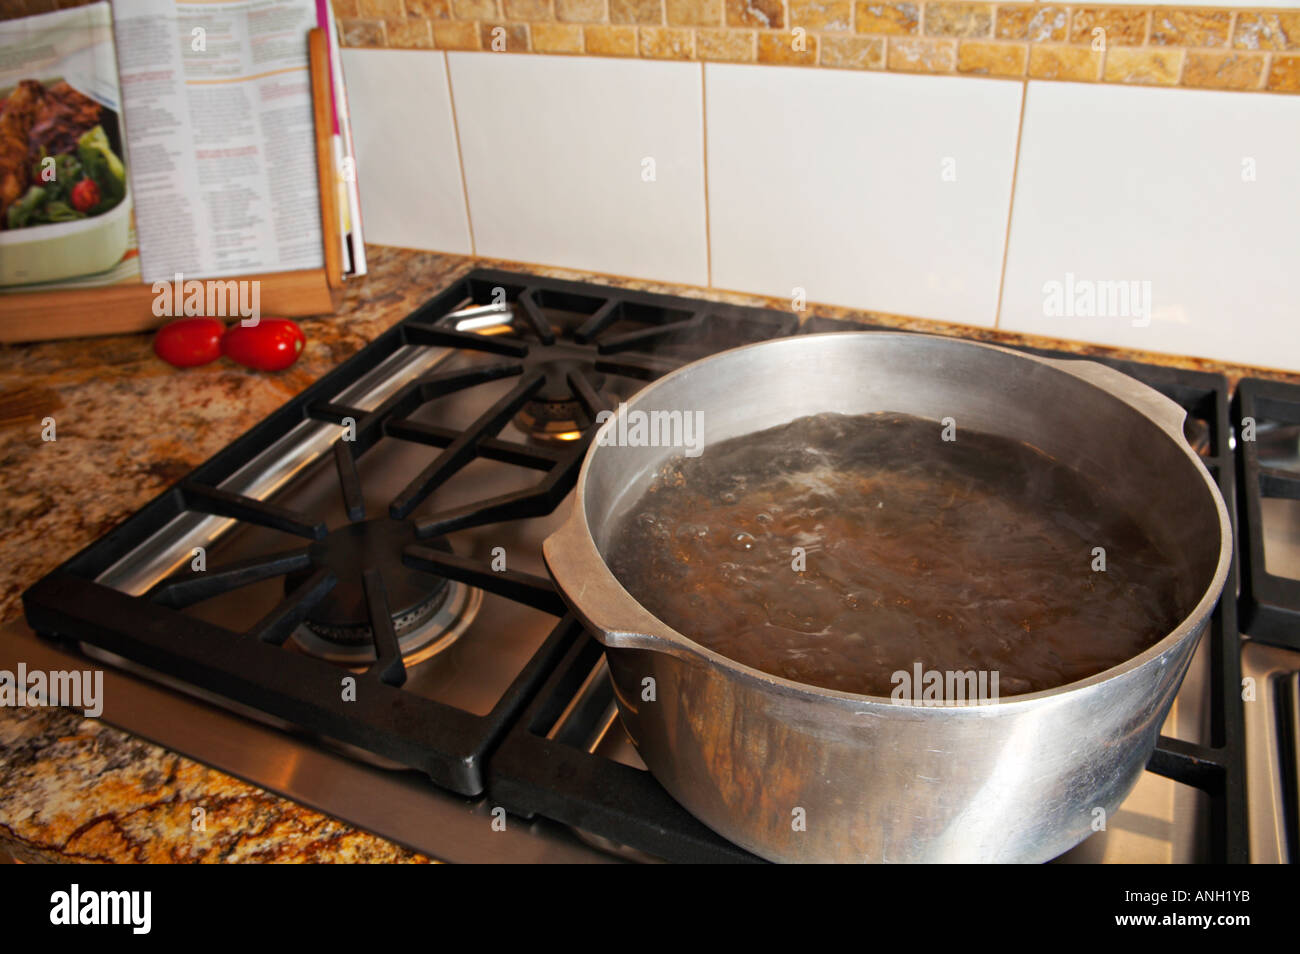 https://c8.alamy.com/comp/ANH1YB/still-life-riverwoods-illinois-pasta-submerged-and-cooking-in-boiling-ANH1YB.jpg